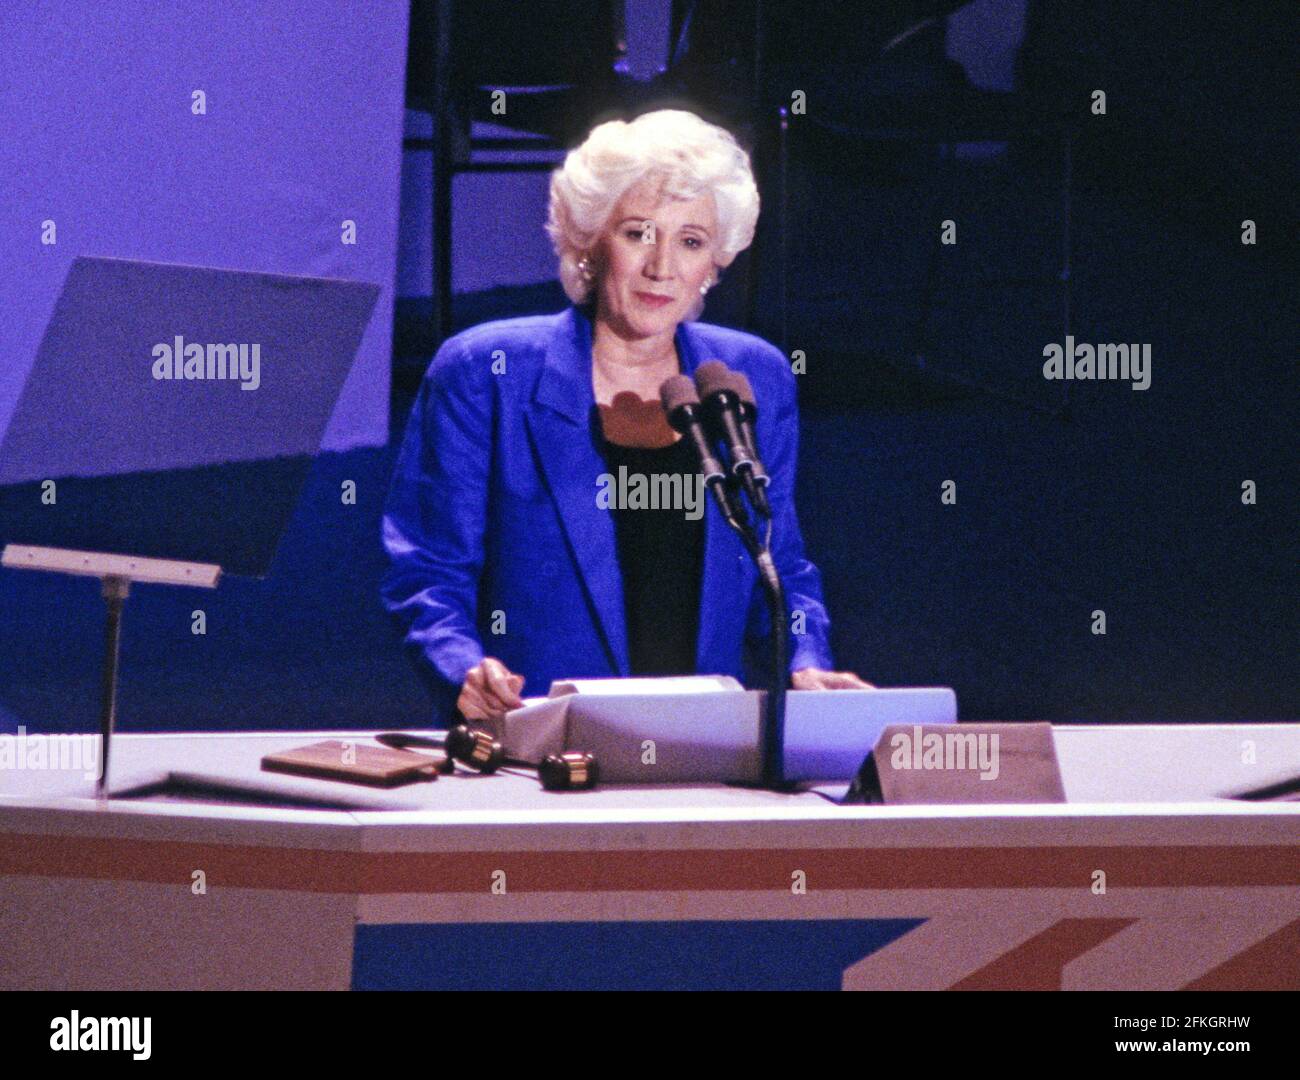 Oscar Award-winning actress Olympia Dukakis, makes remarks supporting her cousin, Governor Michael Dukakis (Democrat of Massachusetts), the 1988 Democratic Party nominee for President of the United States, at the 1988 Democratic National Convention in the Omni Coliseum in Atlanta, Georgia on July 21, 1988. Credit: Arnie Sachs / CNP / MediaPunch Stock Photo